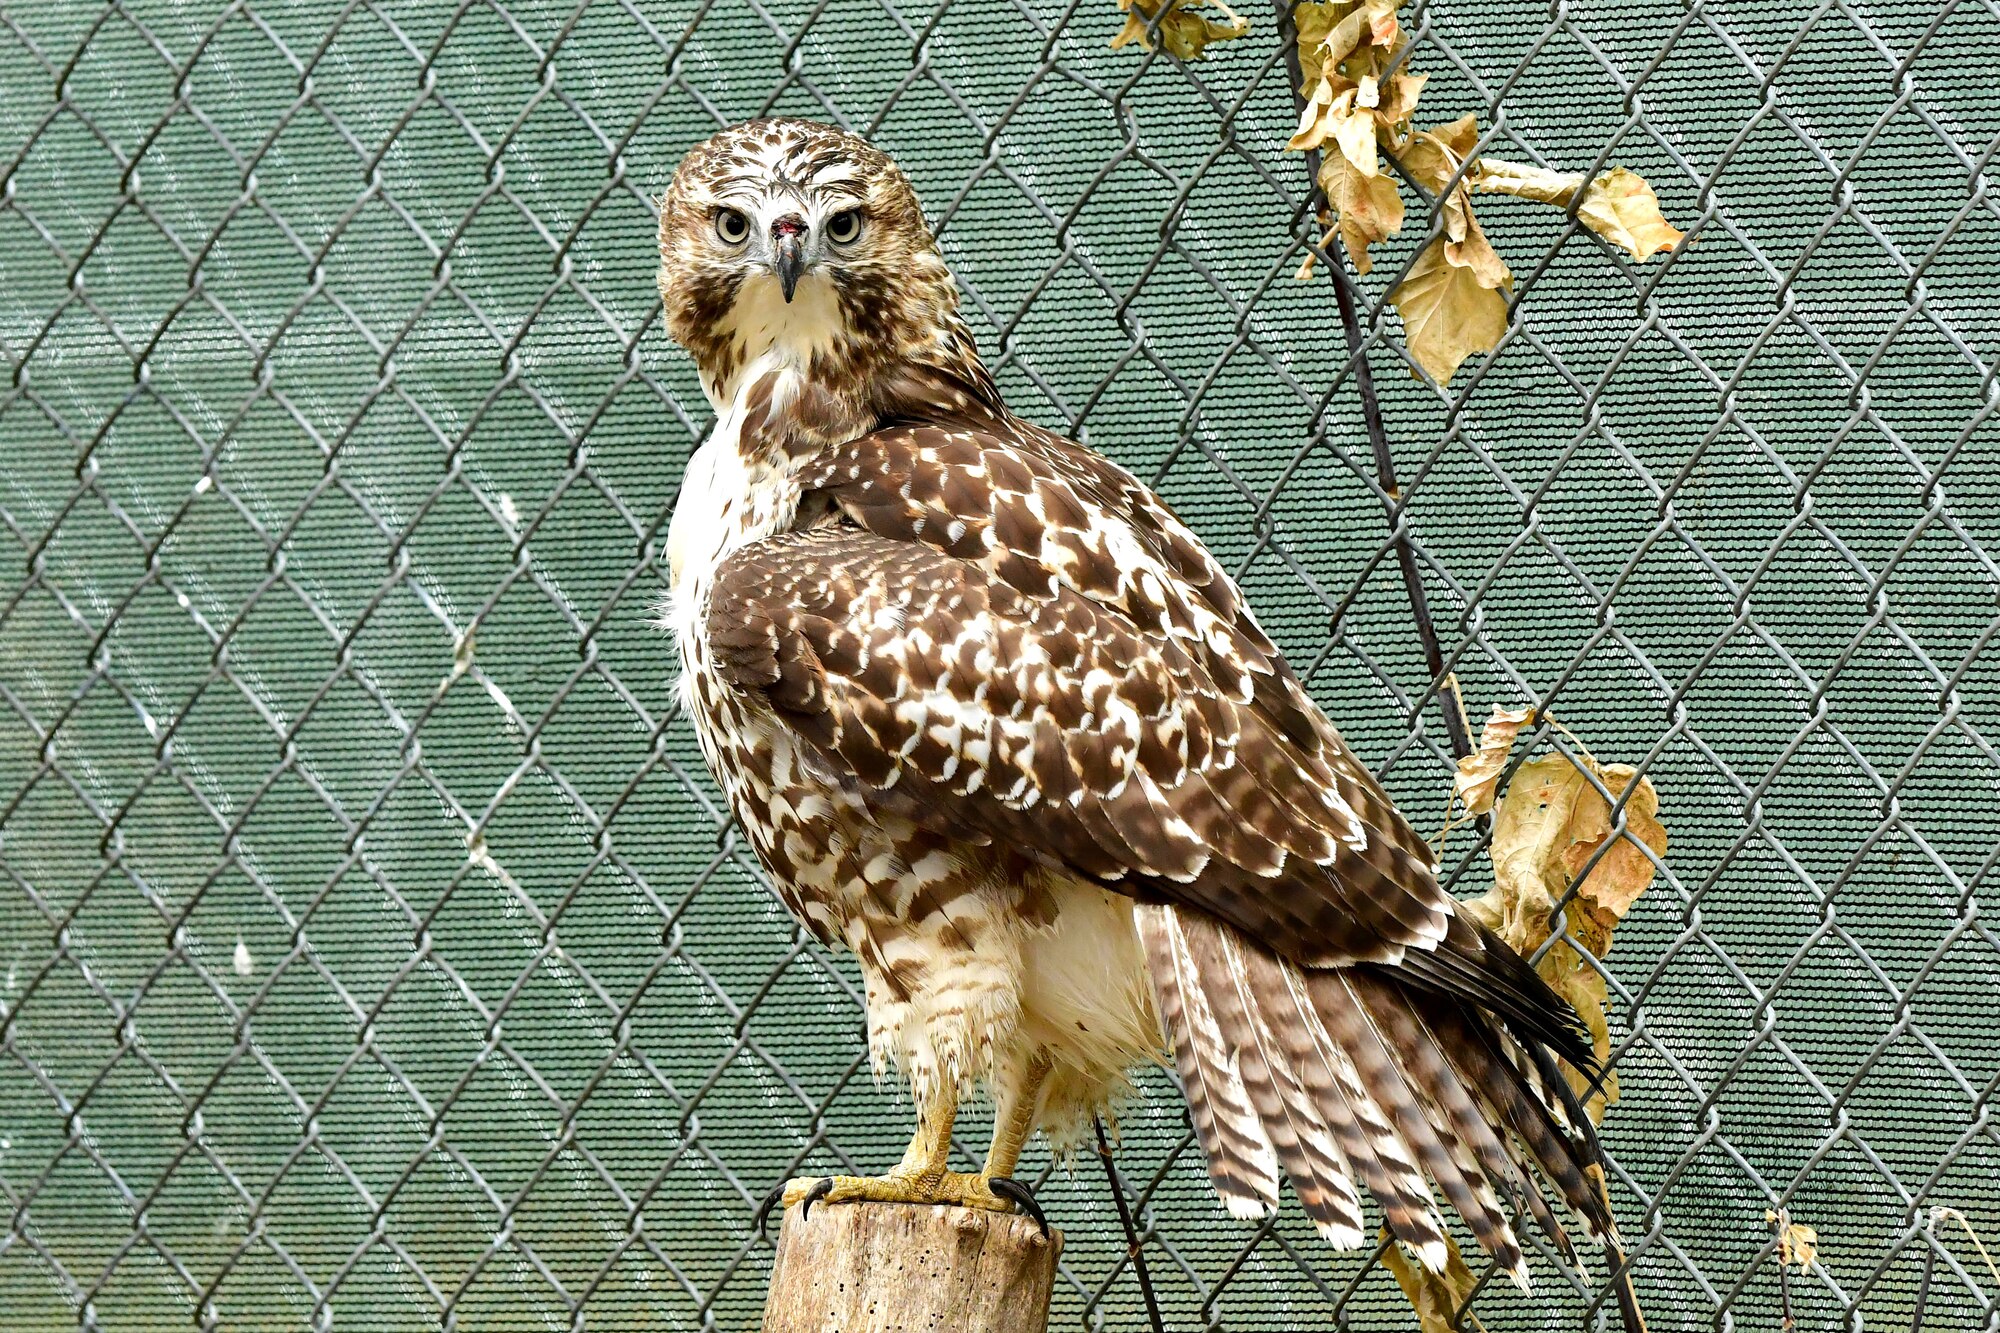 A Swainson's hawk rests on a perch prior to its release November 15, 2018, in the Dakota Zoo, Bismarck, North Dakota. Members of the zoo staff received the bird September 5, 2018, after it was discovered injured on Grand Forks Air Force Base, N.D. It was treated back to health for 30 days before its release into the wild. (Courtesy photo by Mike LaLonde/Dakota Zoo)